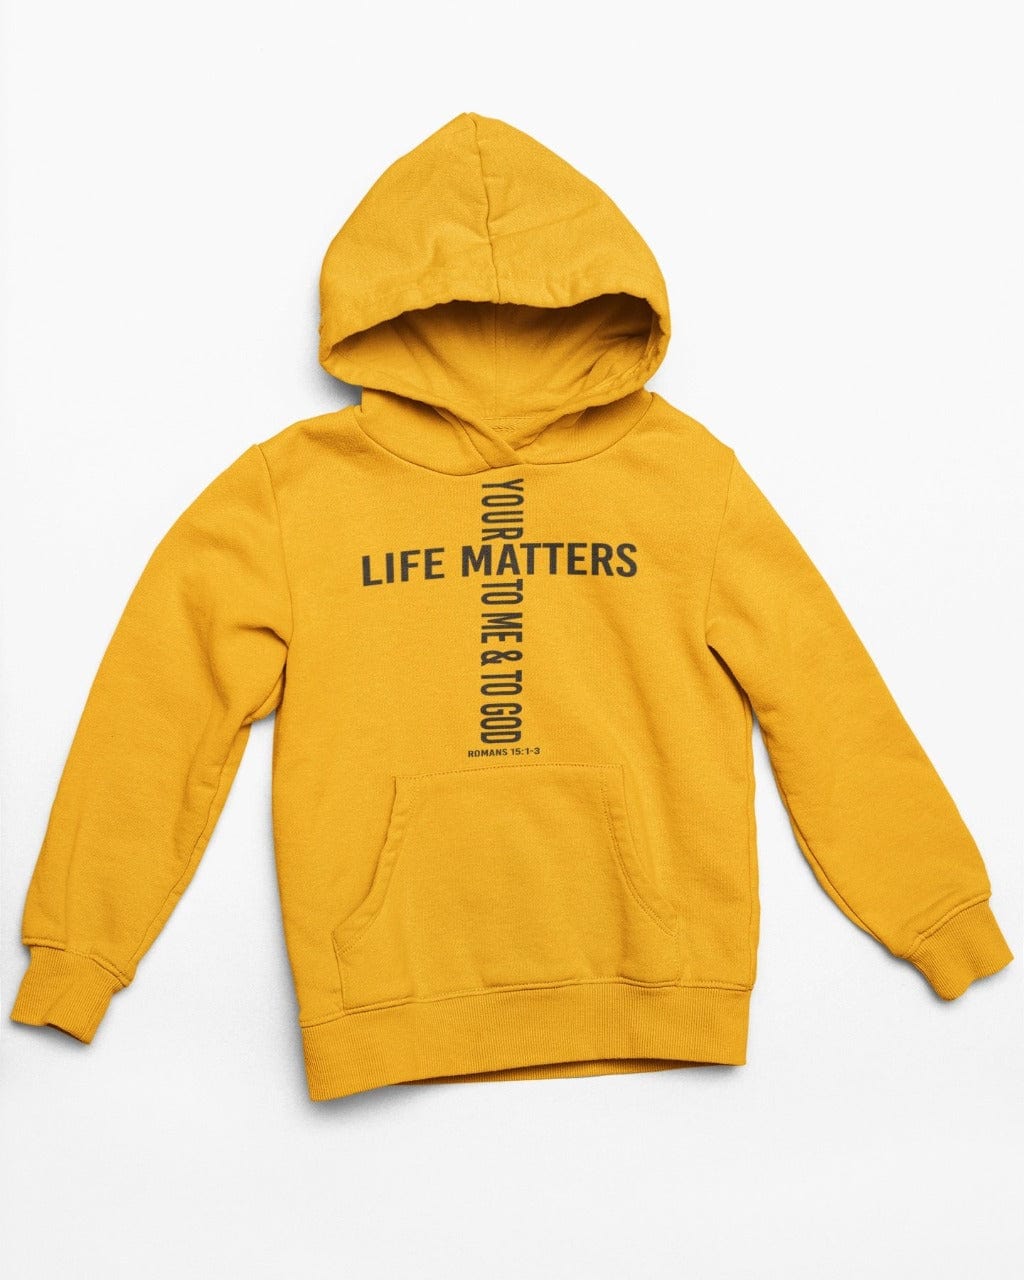 Wrighteous Wear Hoodie Gold / M Your Life Matters Unisex Christian Hoodie